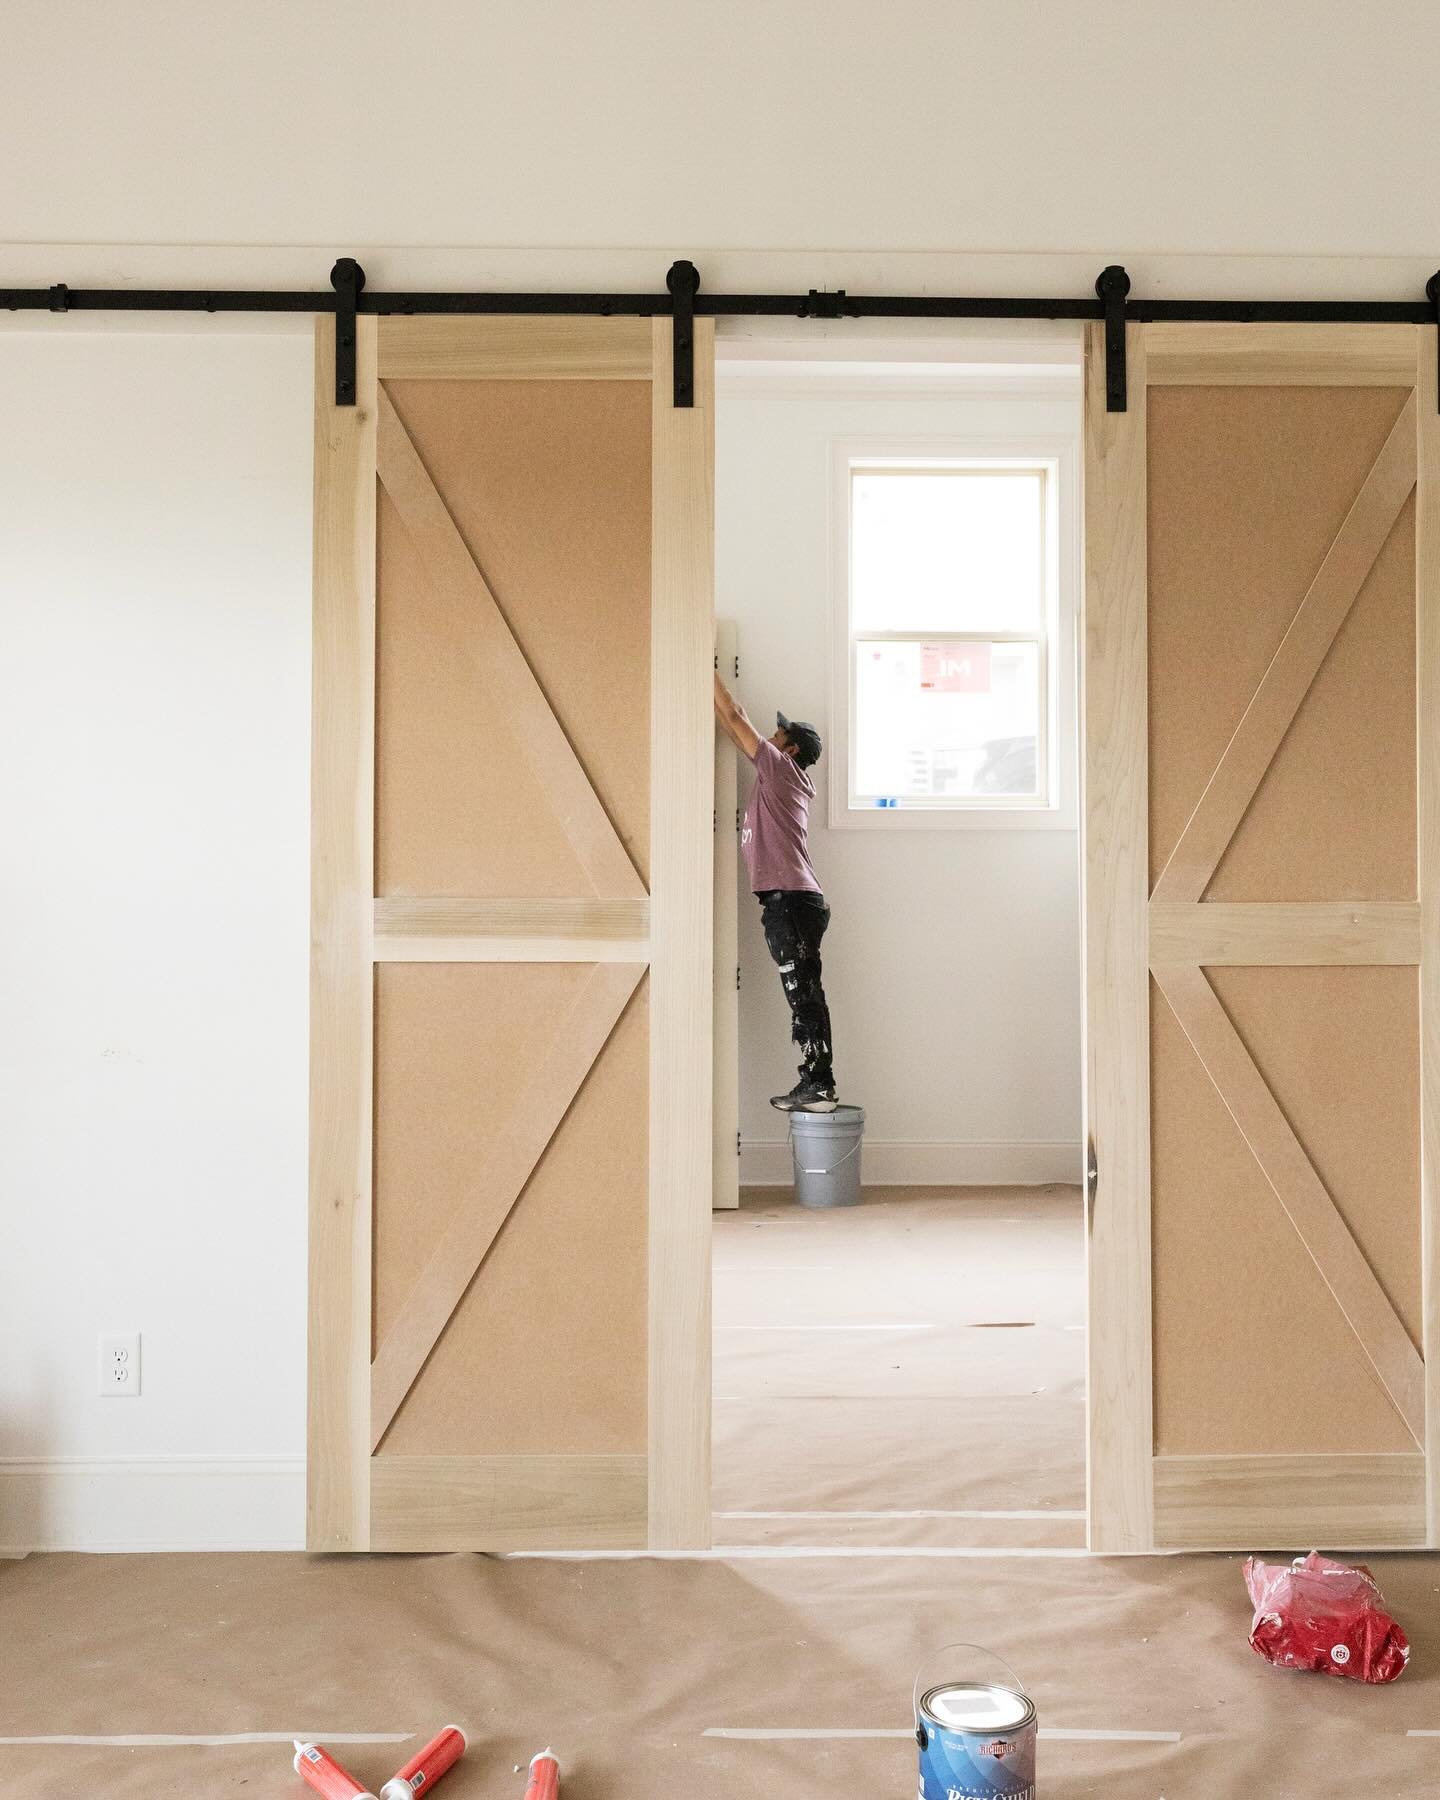 Nothing like some 8 foot barn doors to make a space really pop! 💥

Really excited to see this one come together. 👀 peep our favorite painters making sure all the little details are perfect!